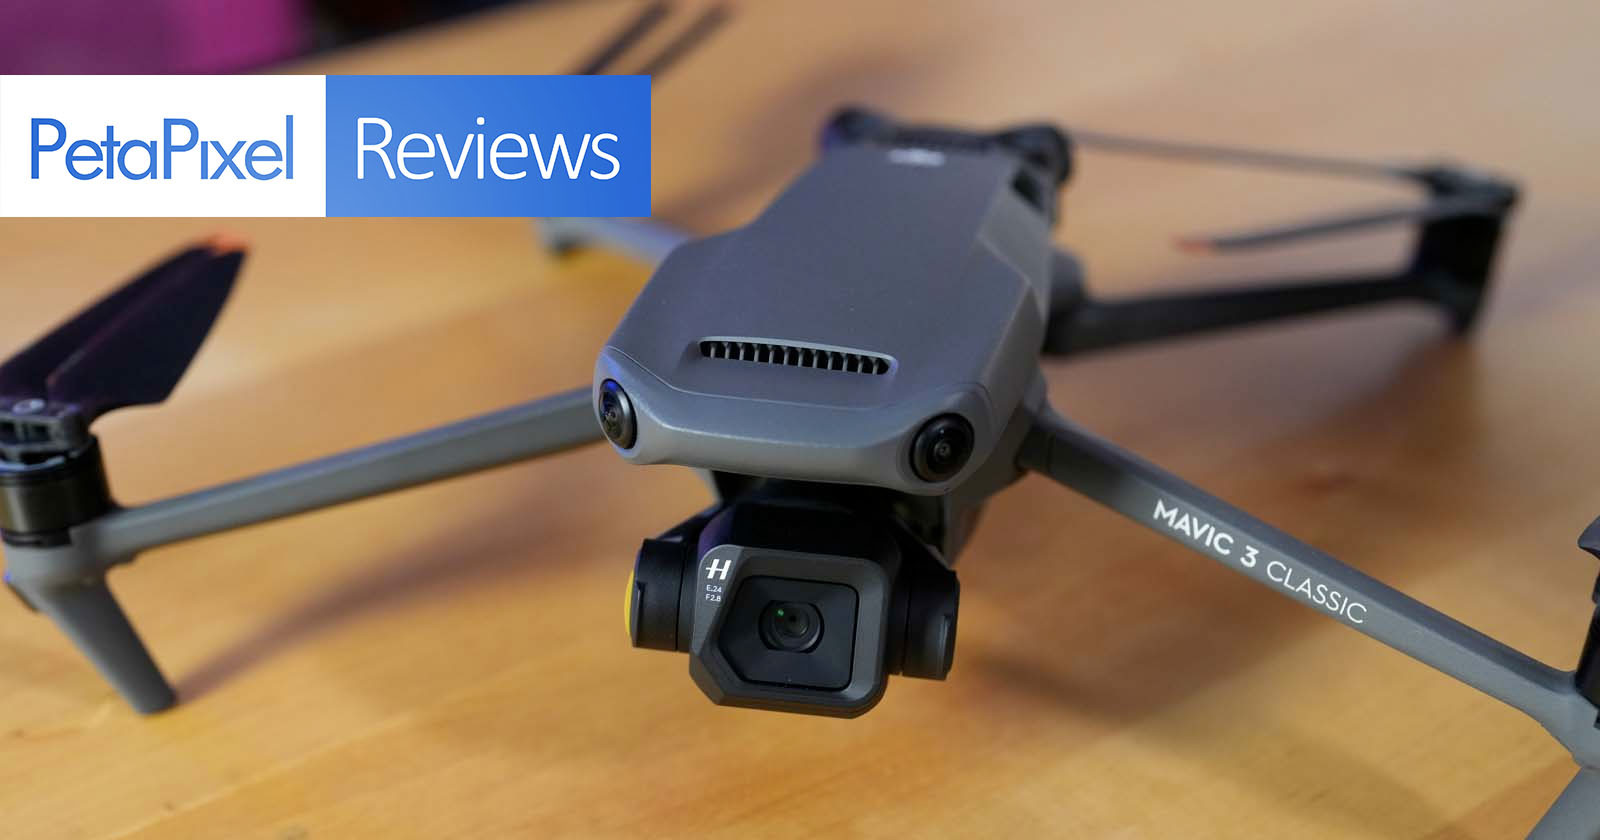 DJI Mavic 3 Classic Review: DJI’s Most Compelling Drone Right Now